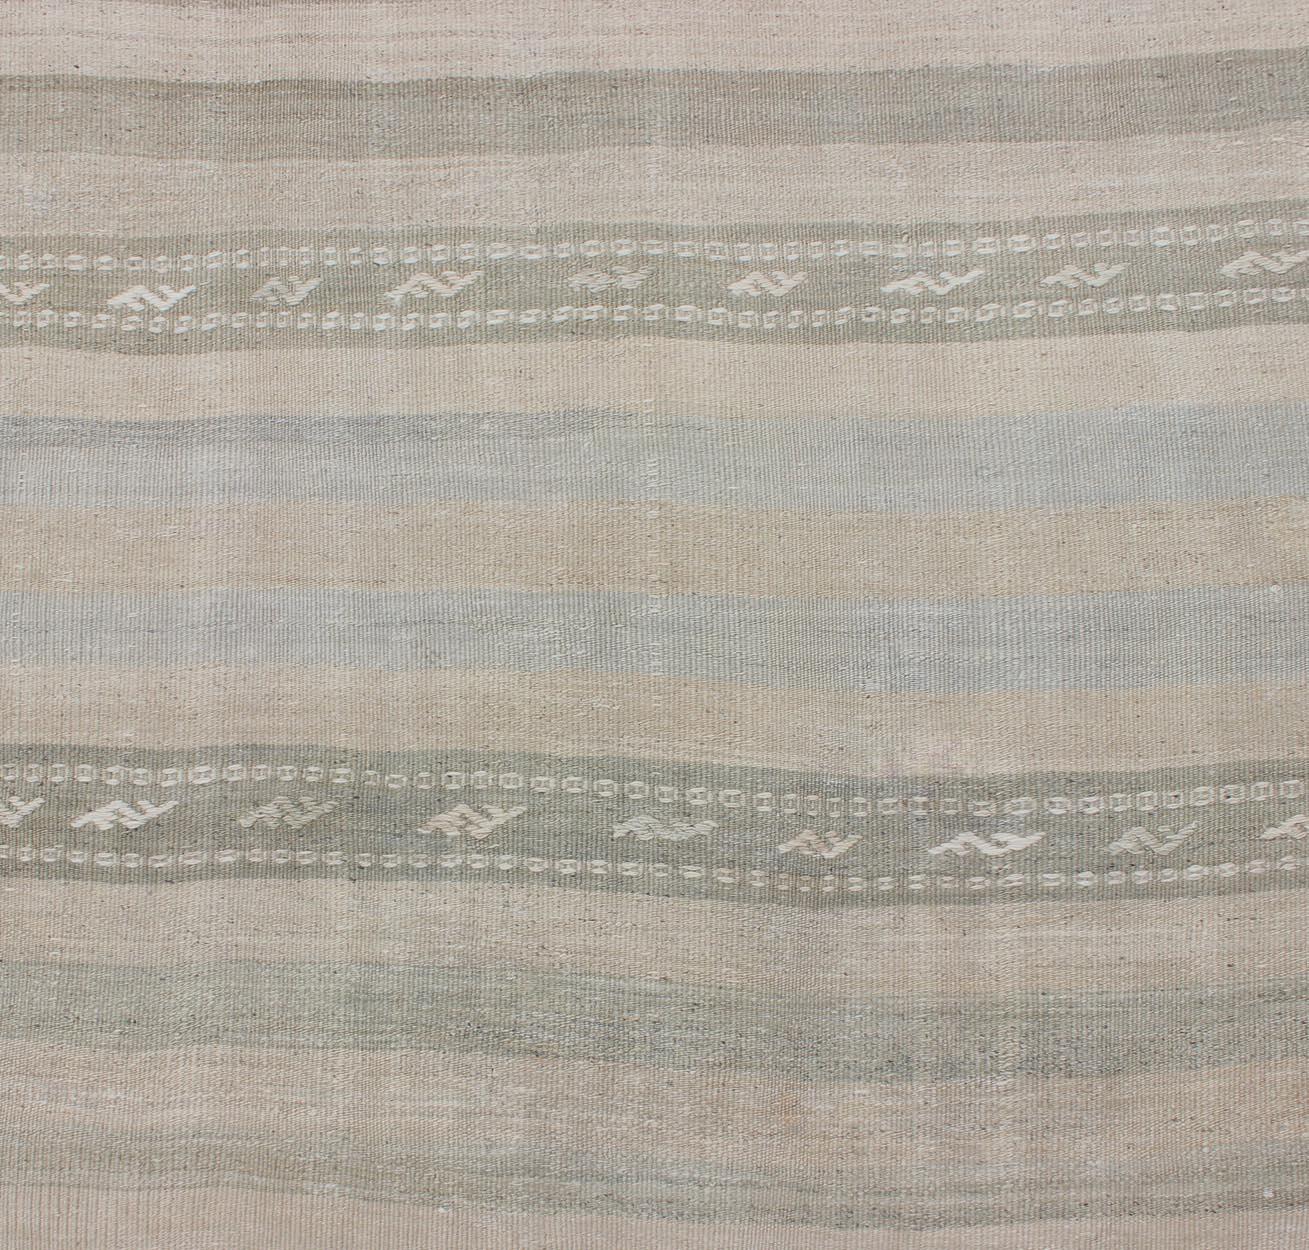 Vintage Turkish Kilim Runner with Stripes in Light Taupe and Neutral Tones For Sale 1